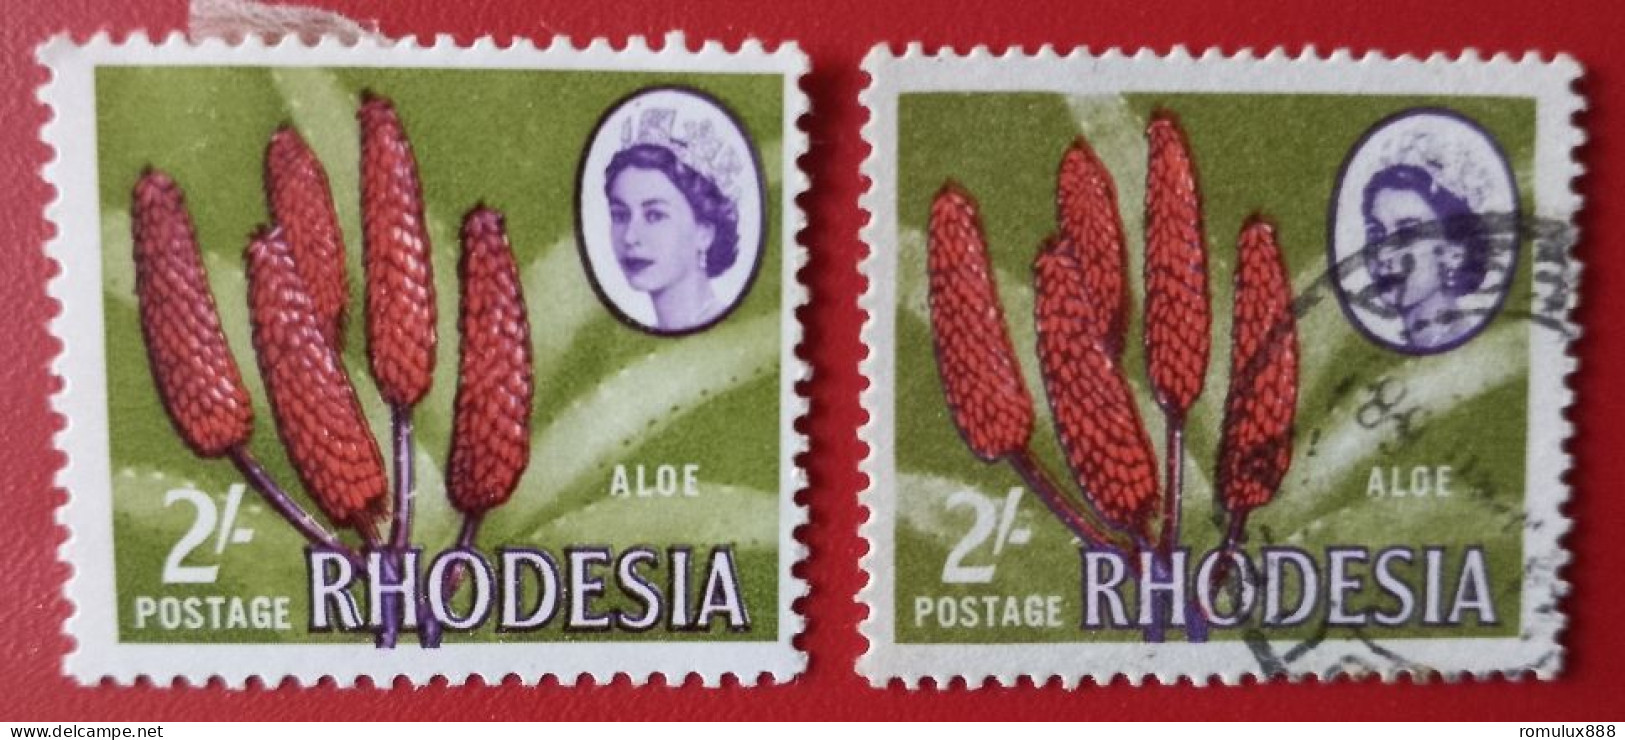 RHODESIA SACC 140-2 SHILLINGS X2 MH/USE WITH FLAW SHIFT OF FLOWER INTO MARGINS - Rhodesia (1964-1980)